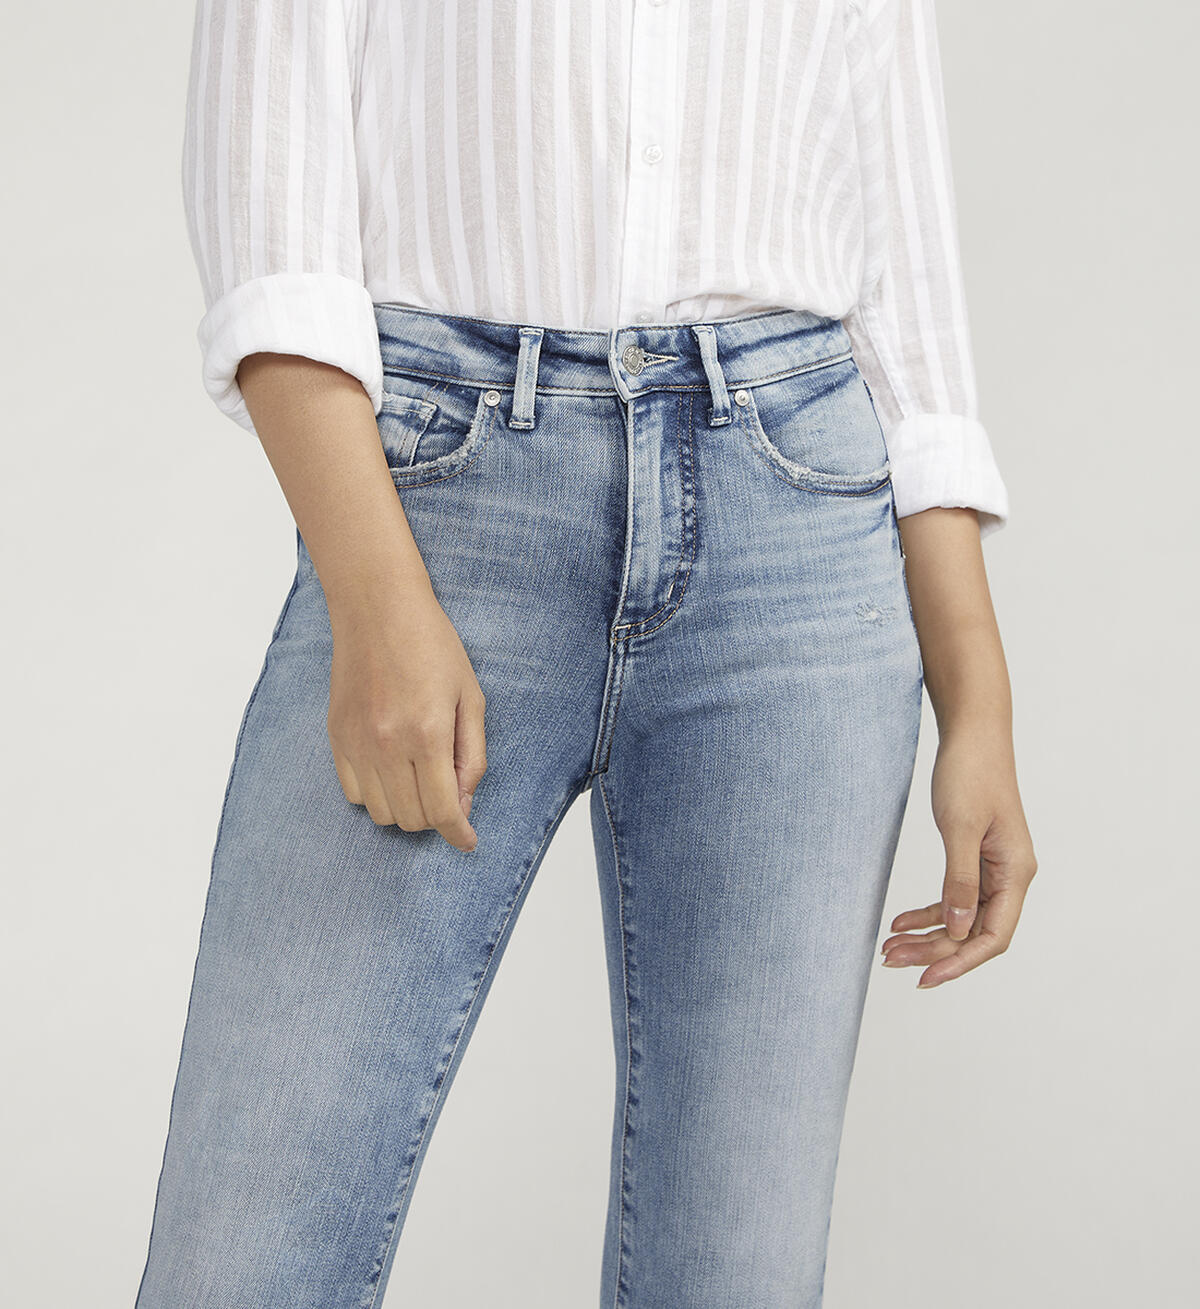 Isbister High Rise Straight Leg Jeans, , hi-res image number 3